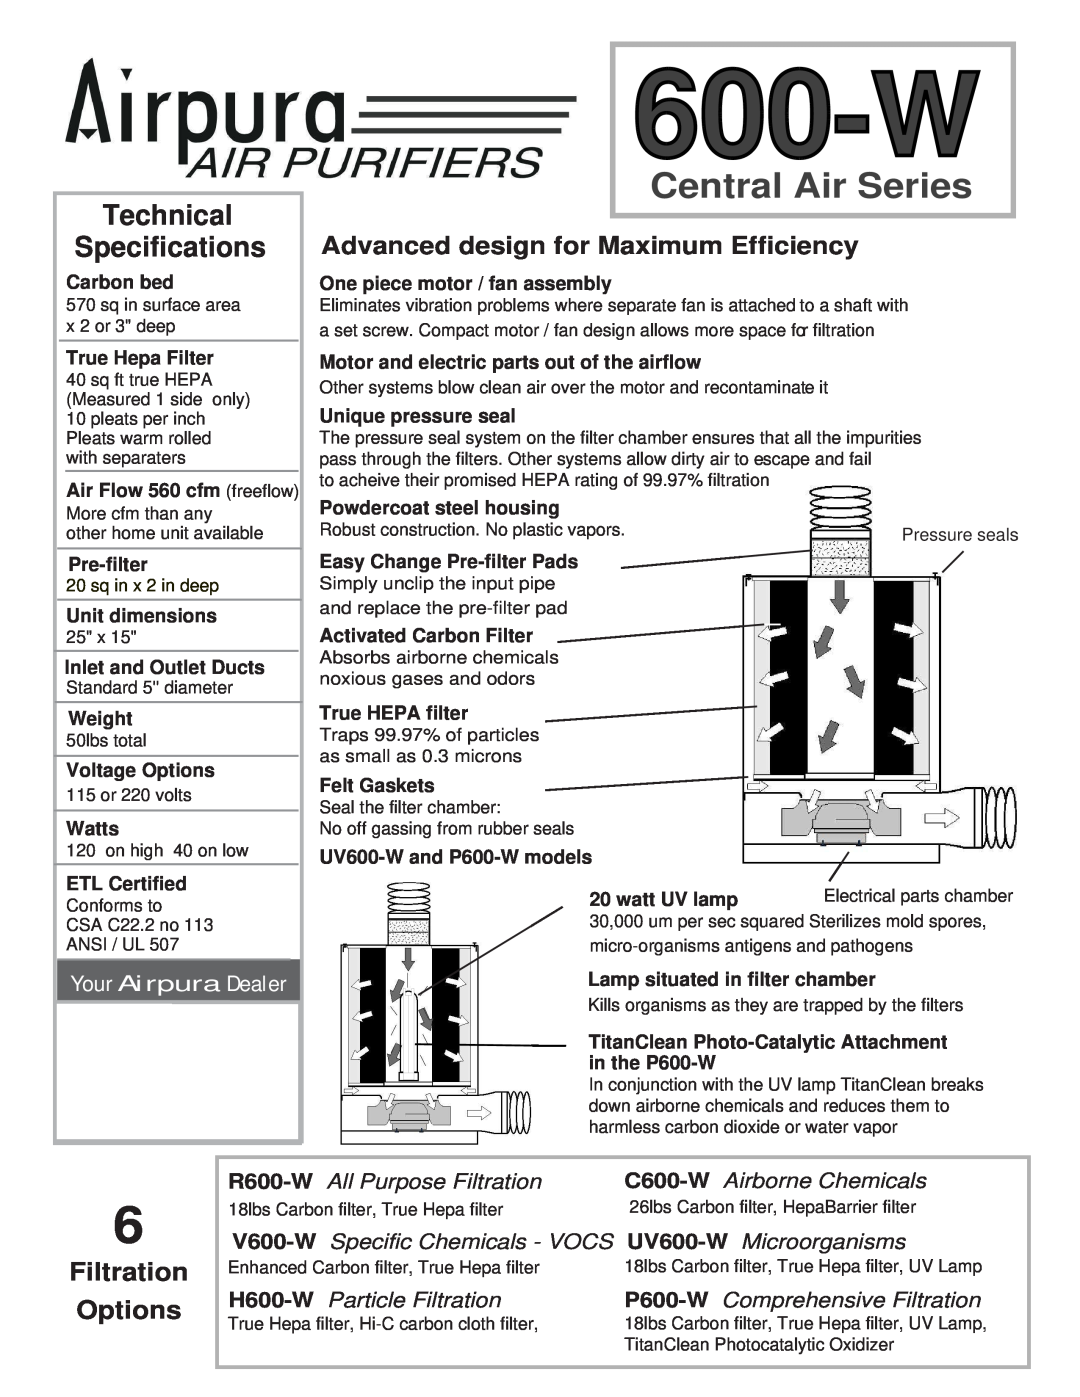 Airpura Industries 600-W warranty Advanced design for Maximum Efficiency, Filtration, Options, Central Air Series 